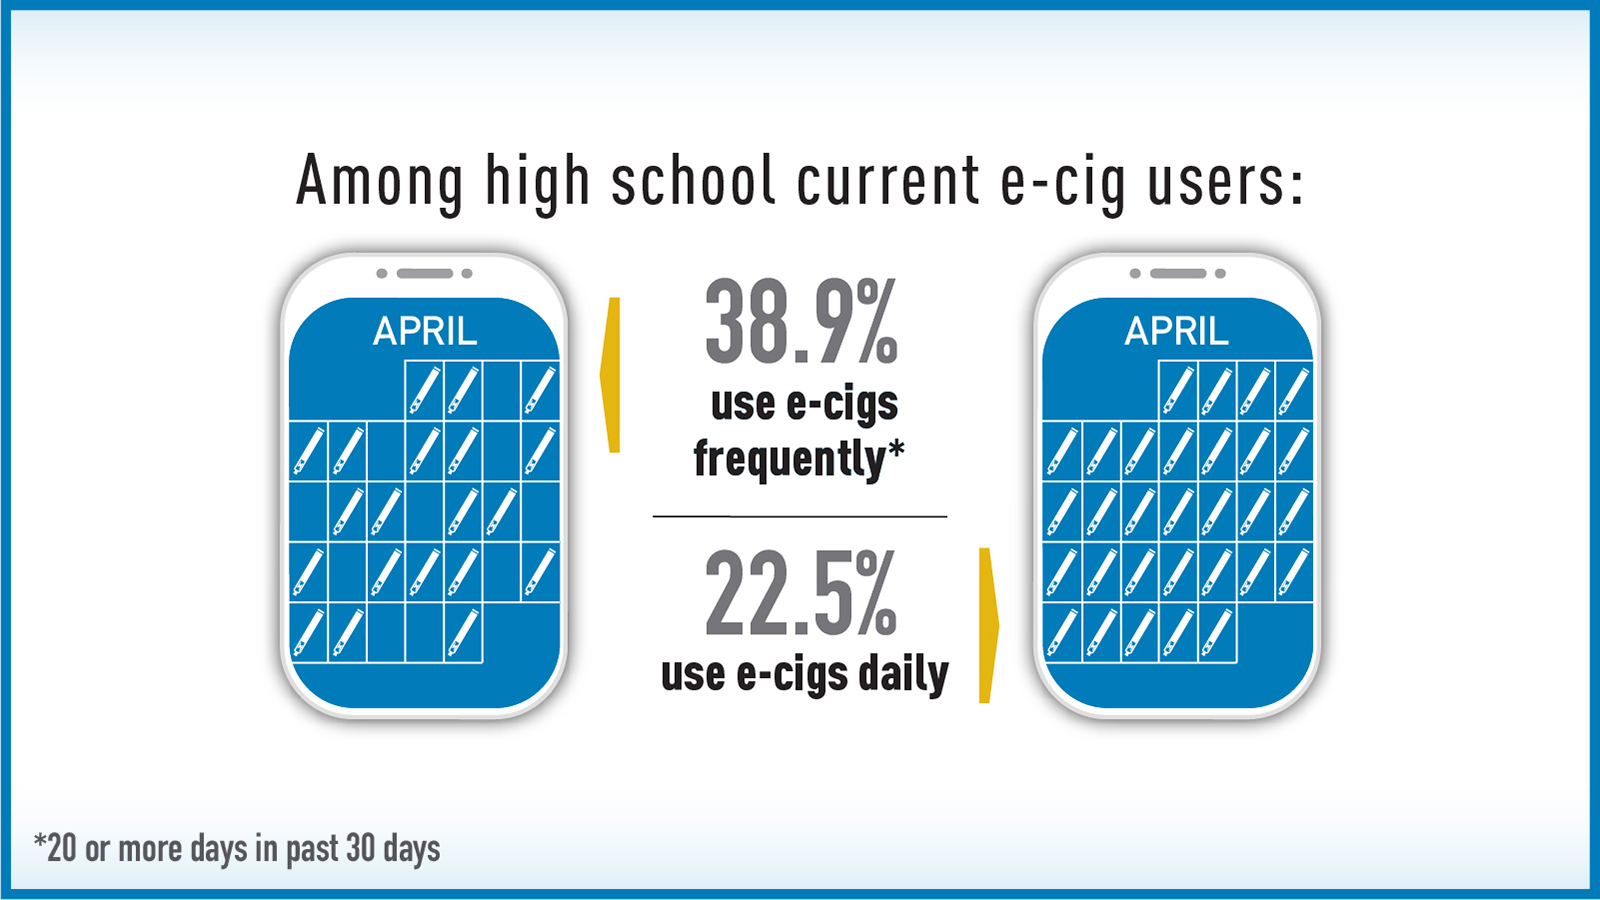 Frequent e-Cigarette use suggests a strong dependence on nicotine